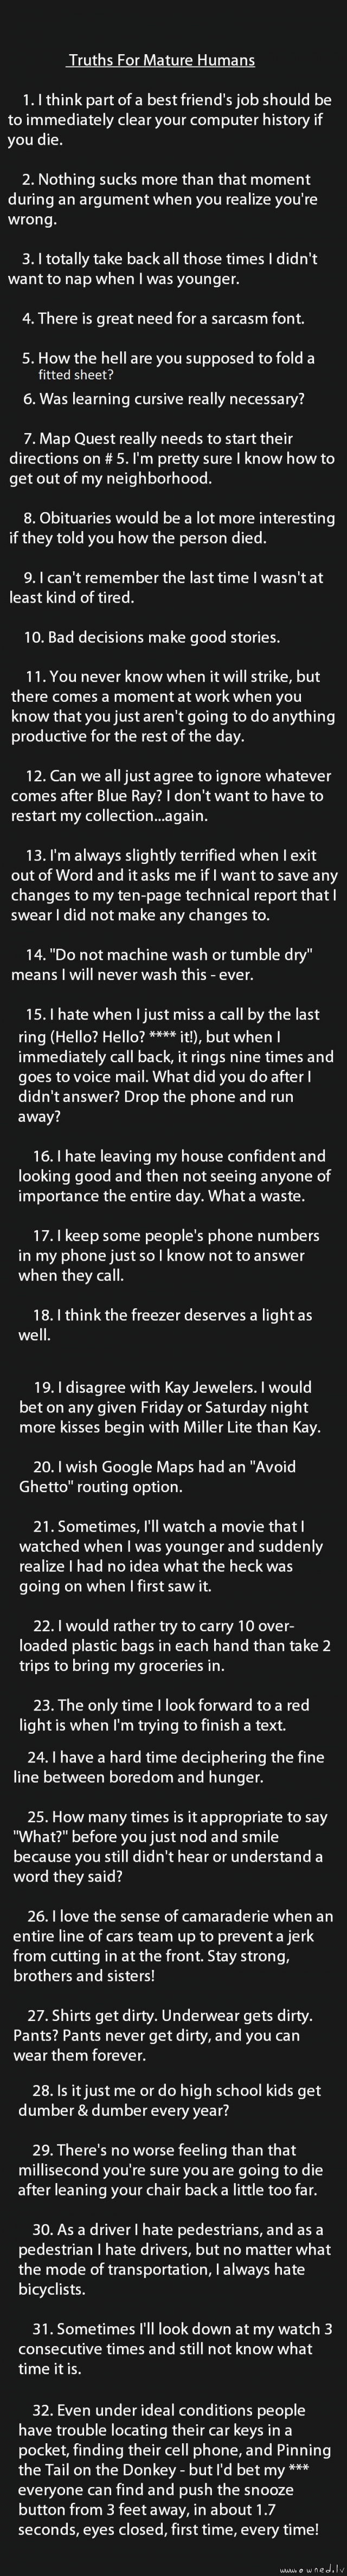 Some of these are so true and some are old as hell.  What do you think?